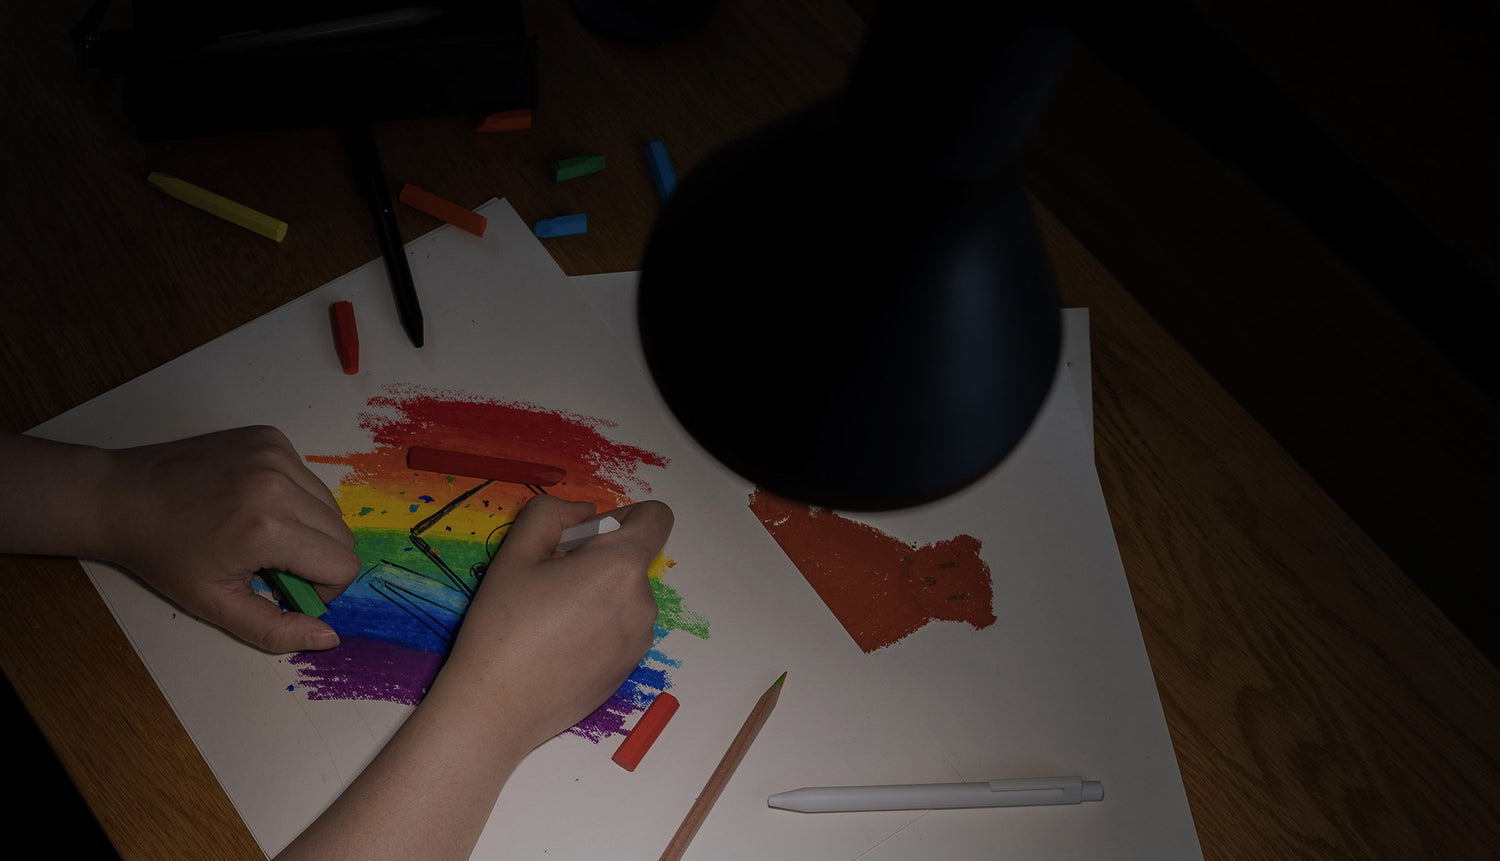 person coloring without floor lamp turned on